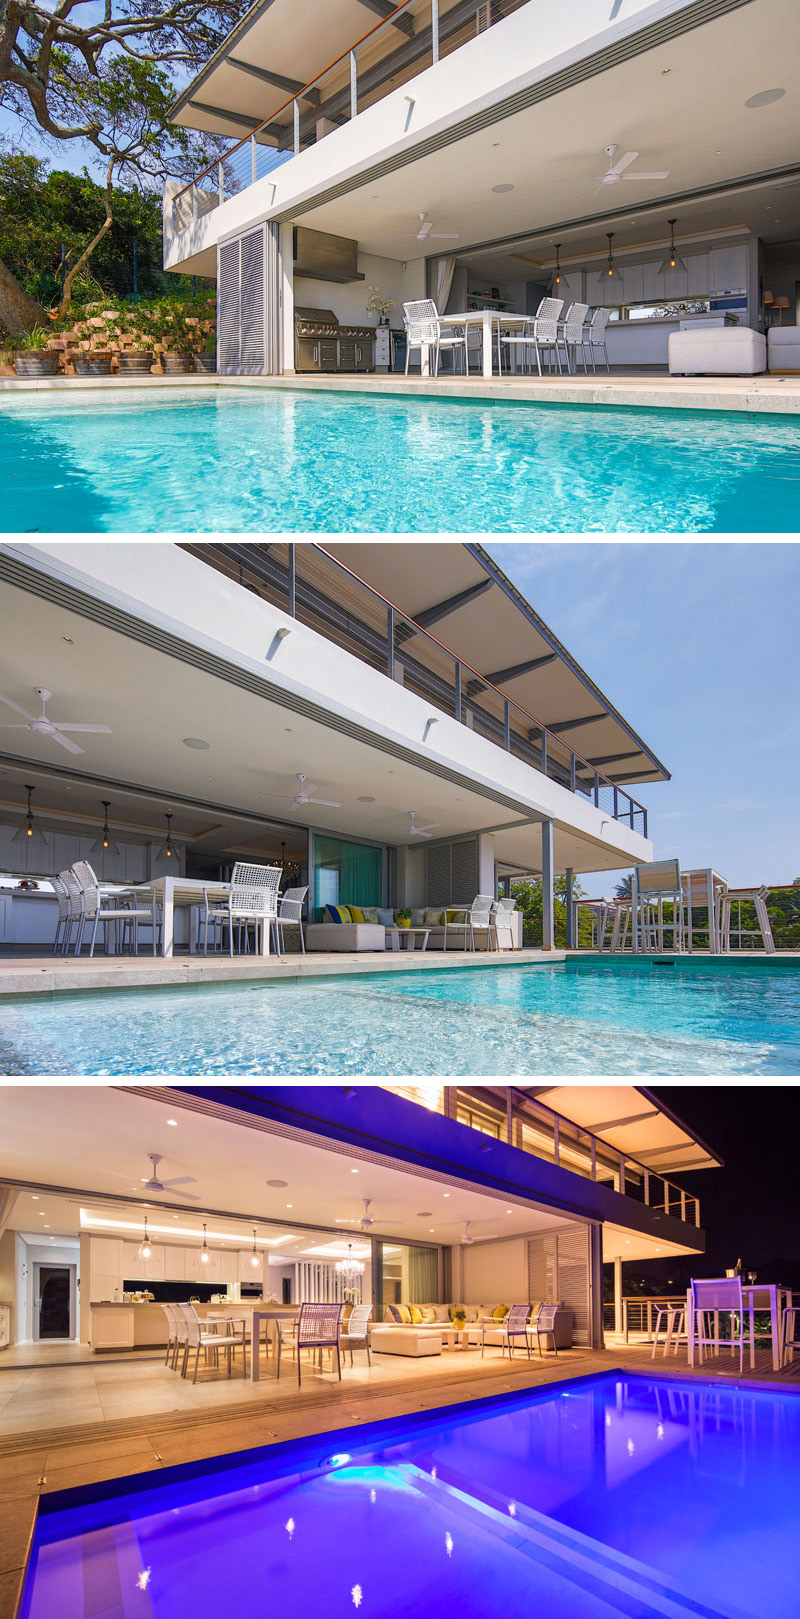 At this modern pool area, there is a covered veranda that has a BBQ, outdoor dining set, and lounge area with upholstered sofas. The pool lights up in the evening for nighttime swimming. 